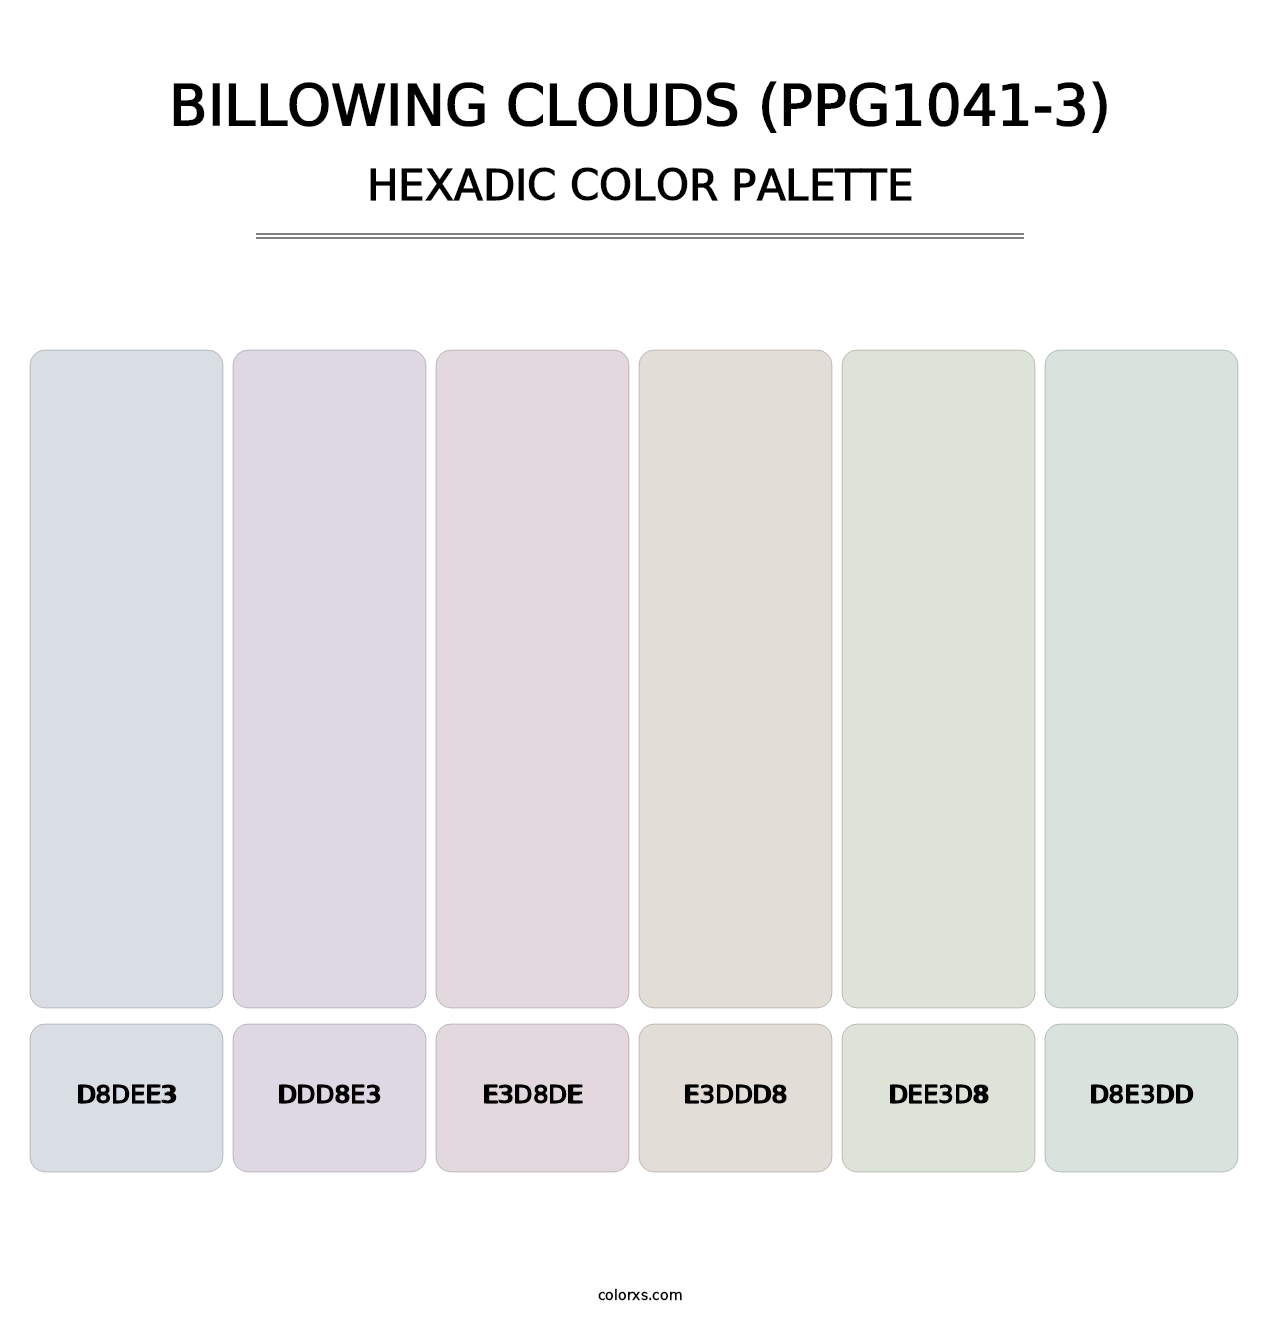 Billowing Clouds (PPG1041-3) - Hexadic Color Palette